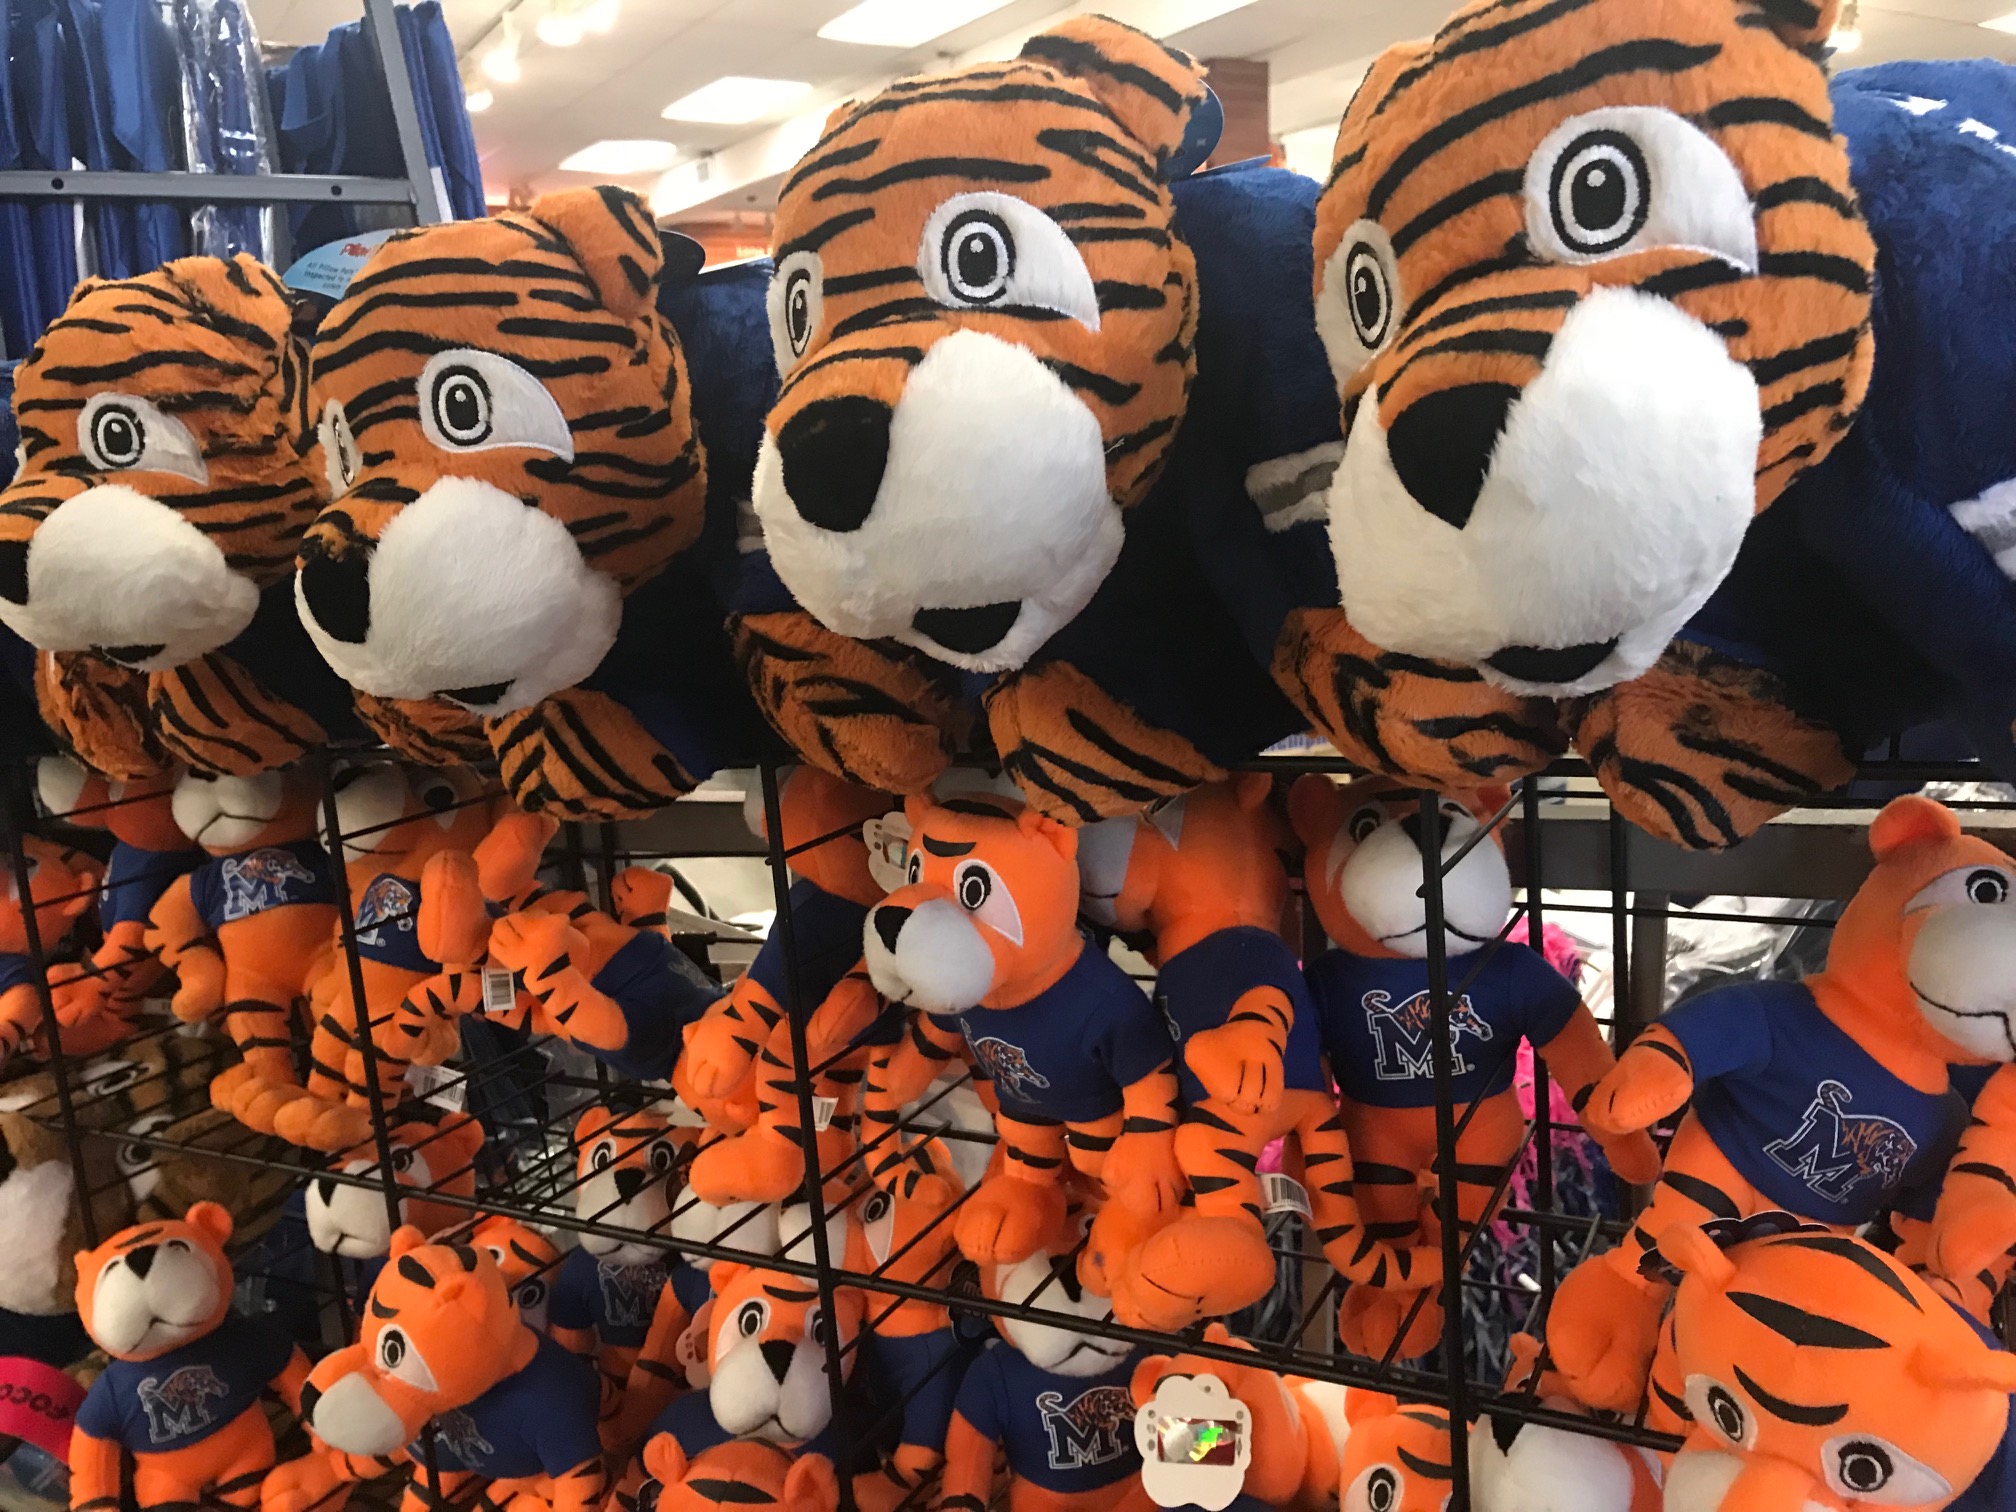 Married to the game: When Tigers score, Memphis small business wins